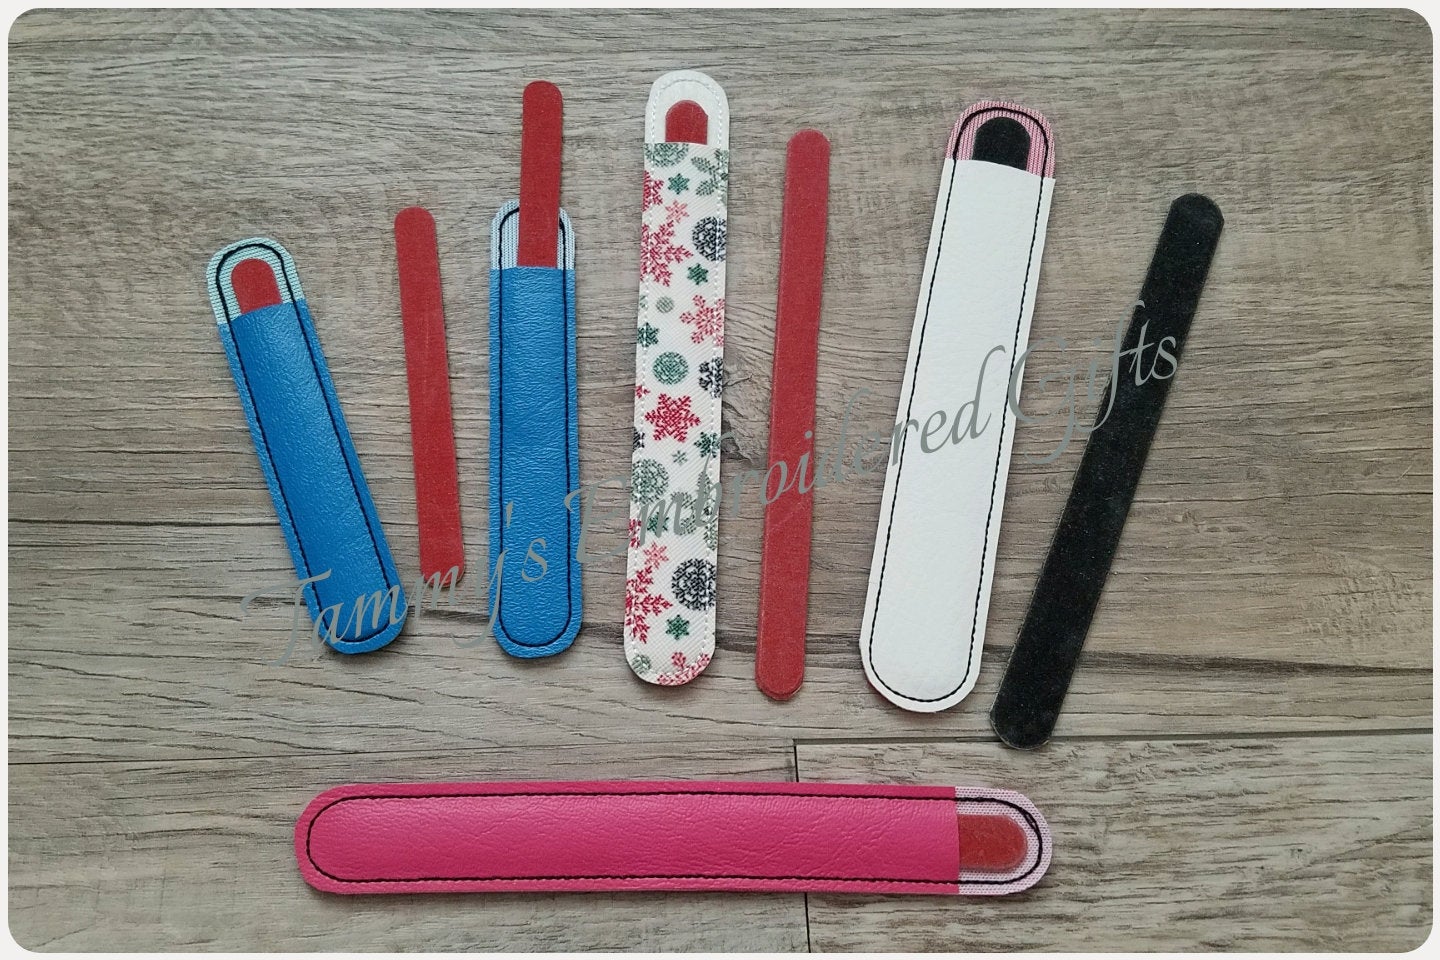 ITH Digital Embroidery Pattern for Nail File Sleeves / Covers 4